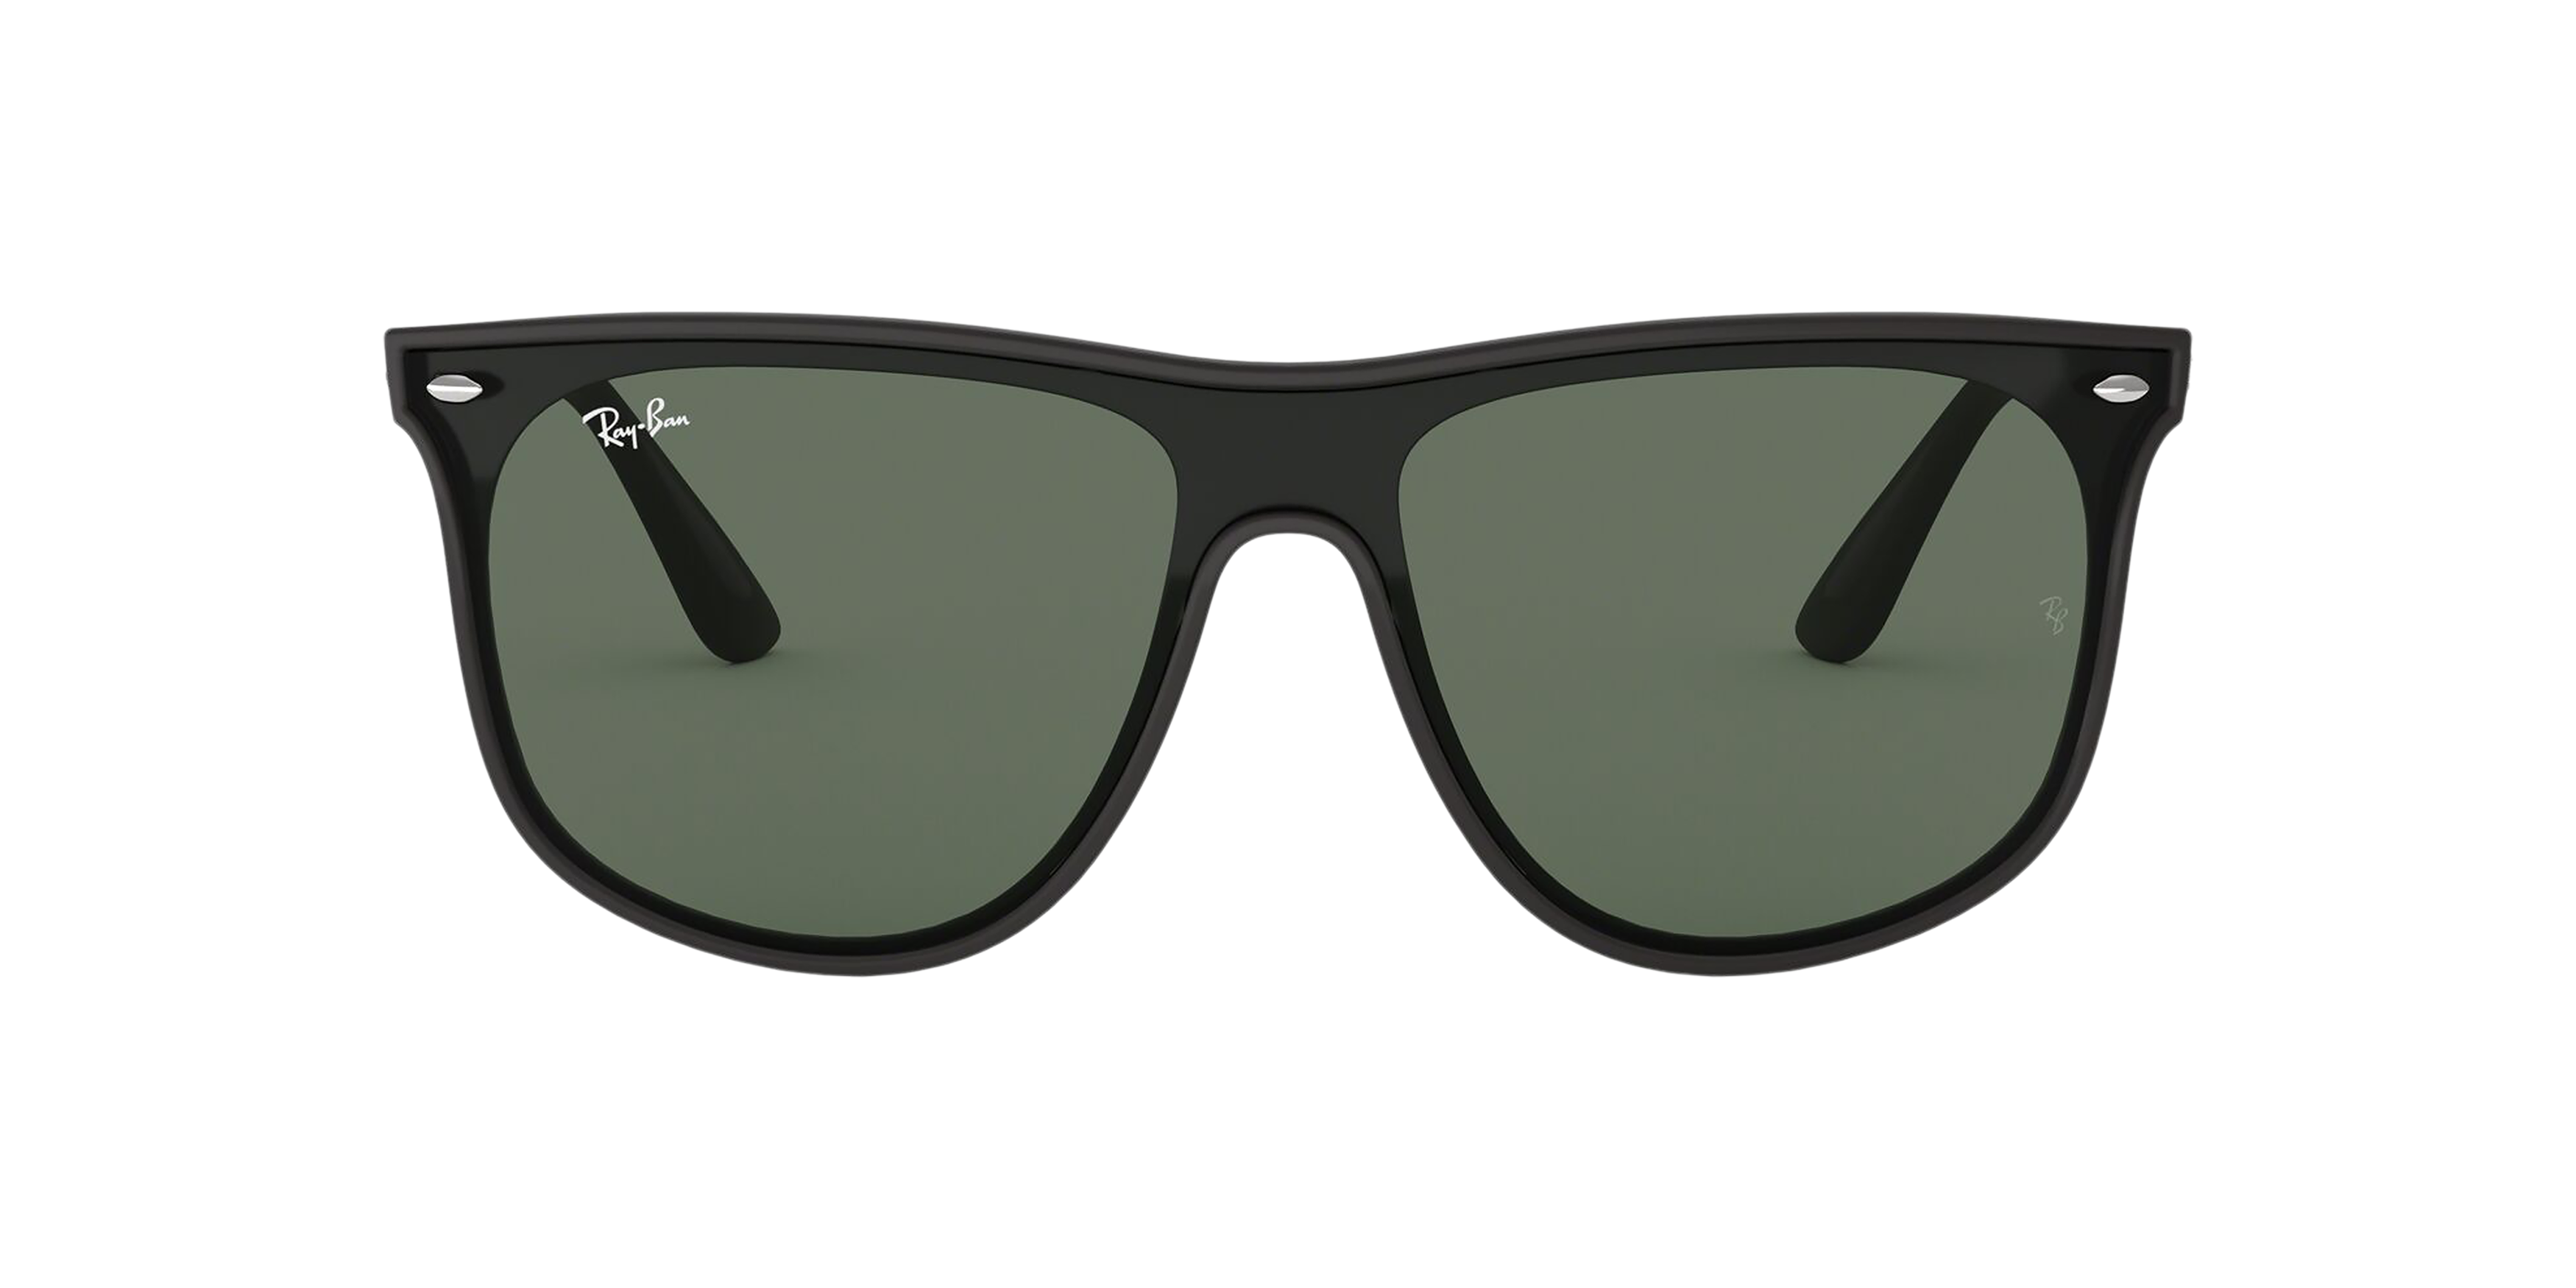 [products.image.front] Ray-Ban Blaze RB4447N 601S71